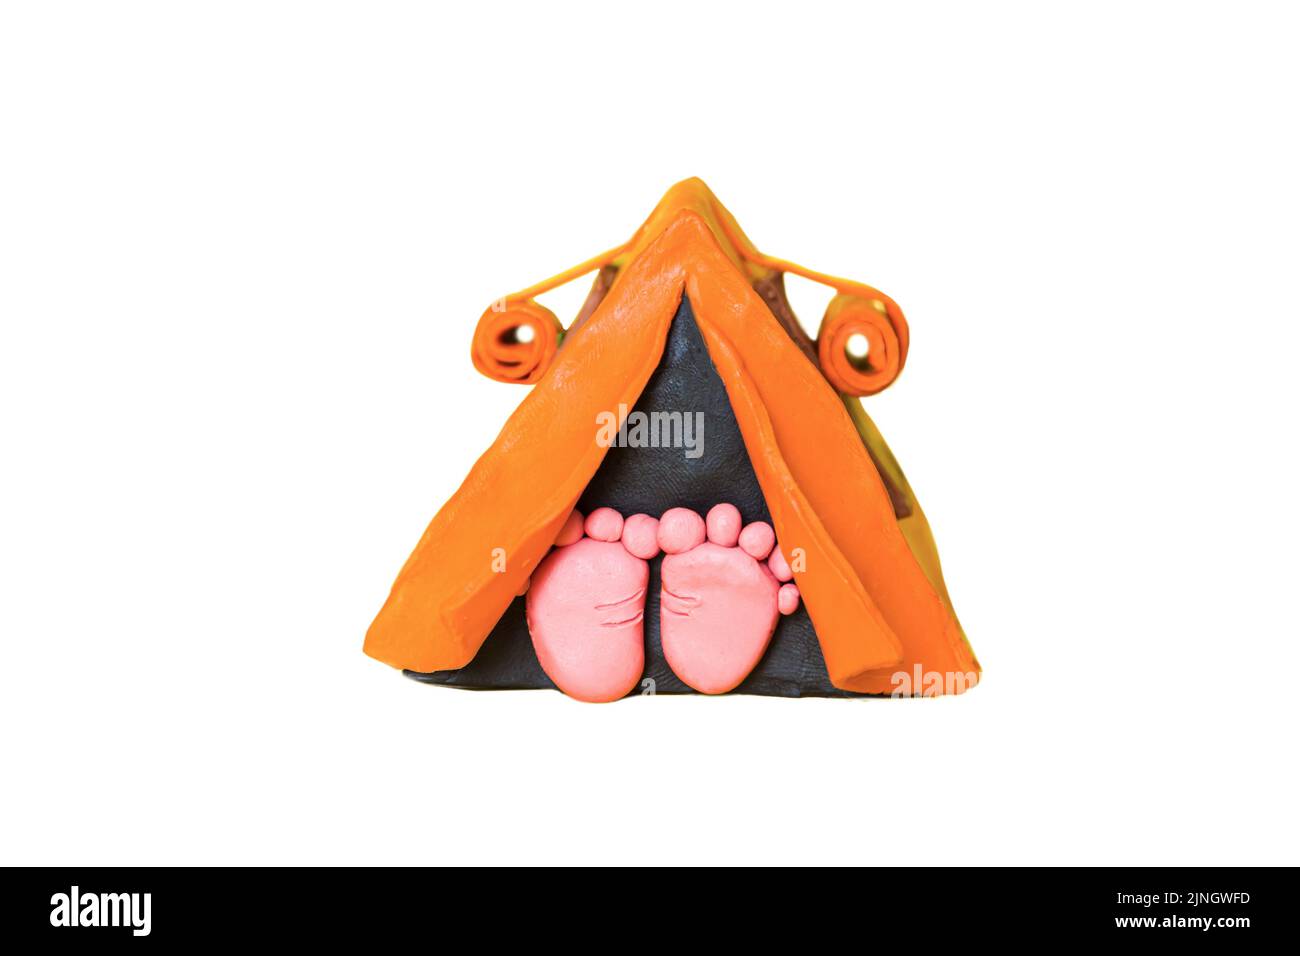 The heels stick out of the orange tent. Made from plasticine. Isolated on white. Stock Photo